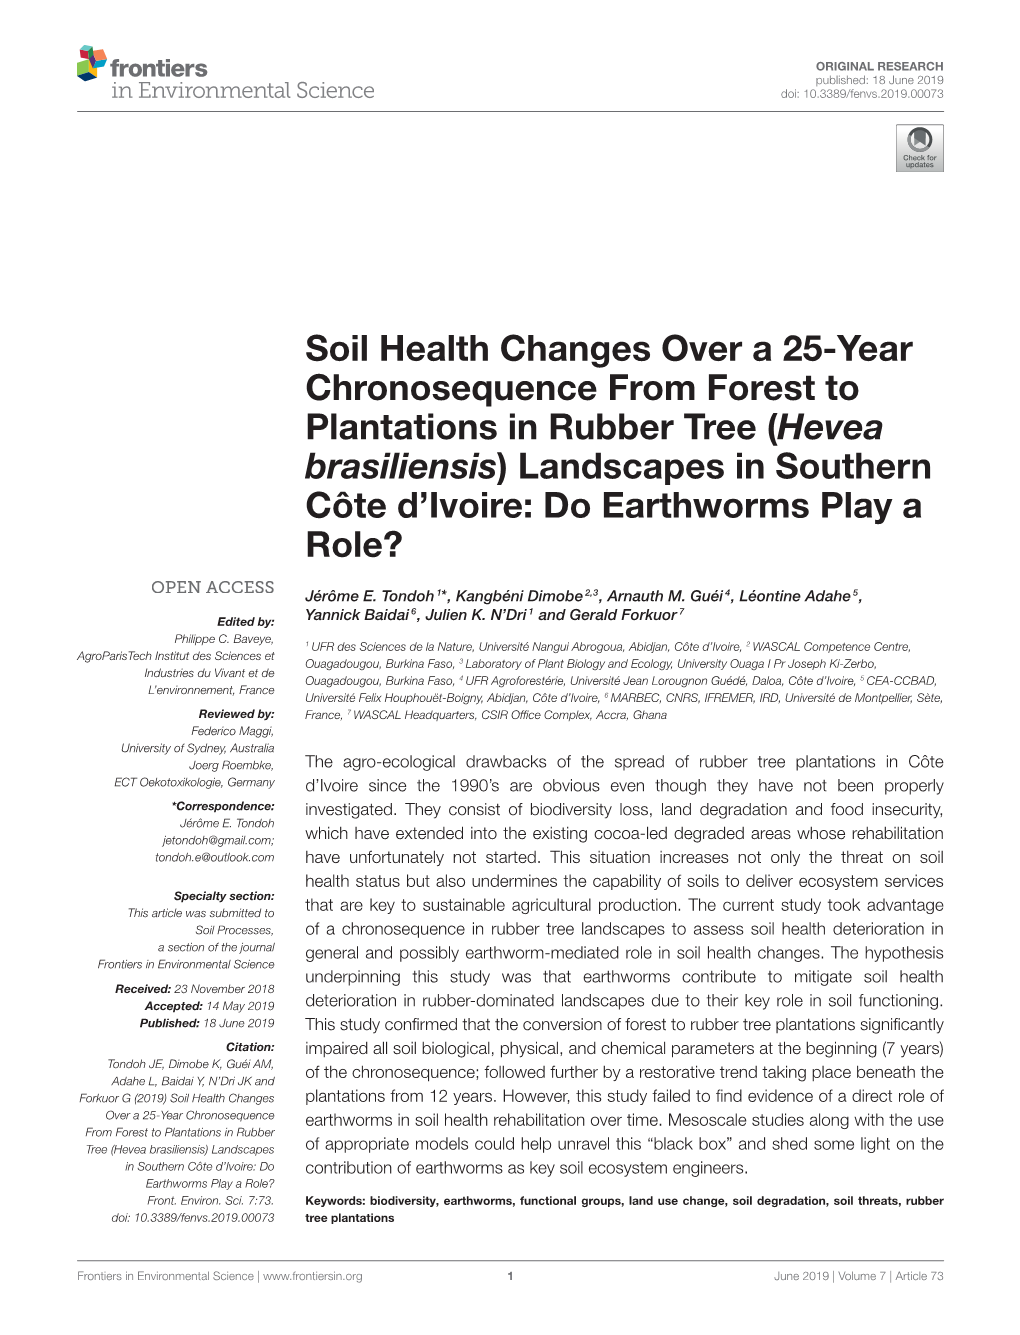 Soil Health Changes Over a 25-Year Chronosequence From